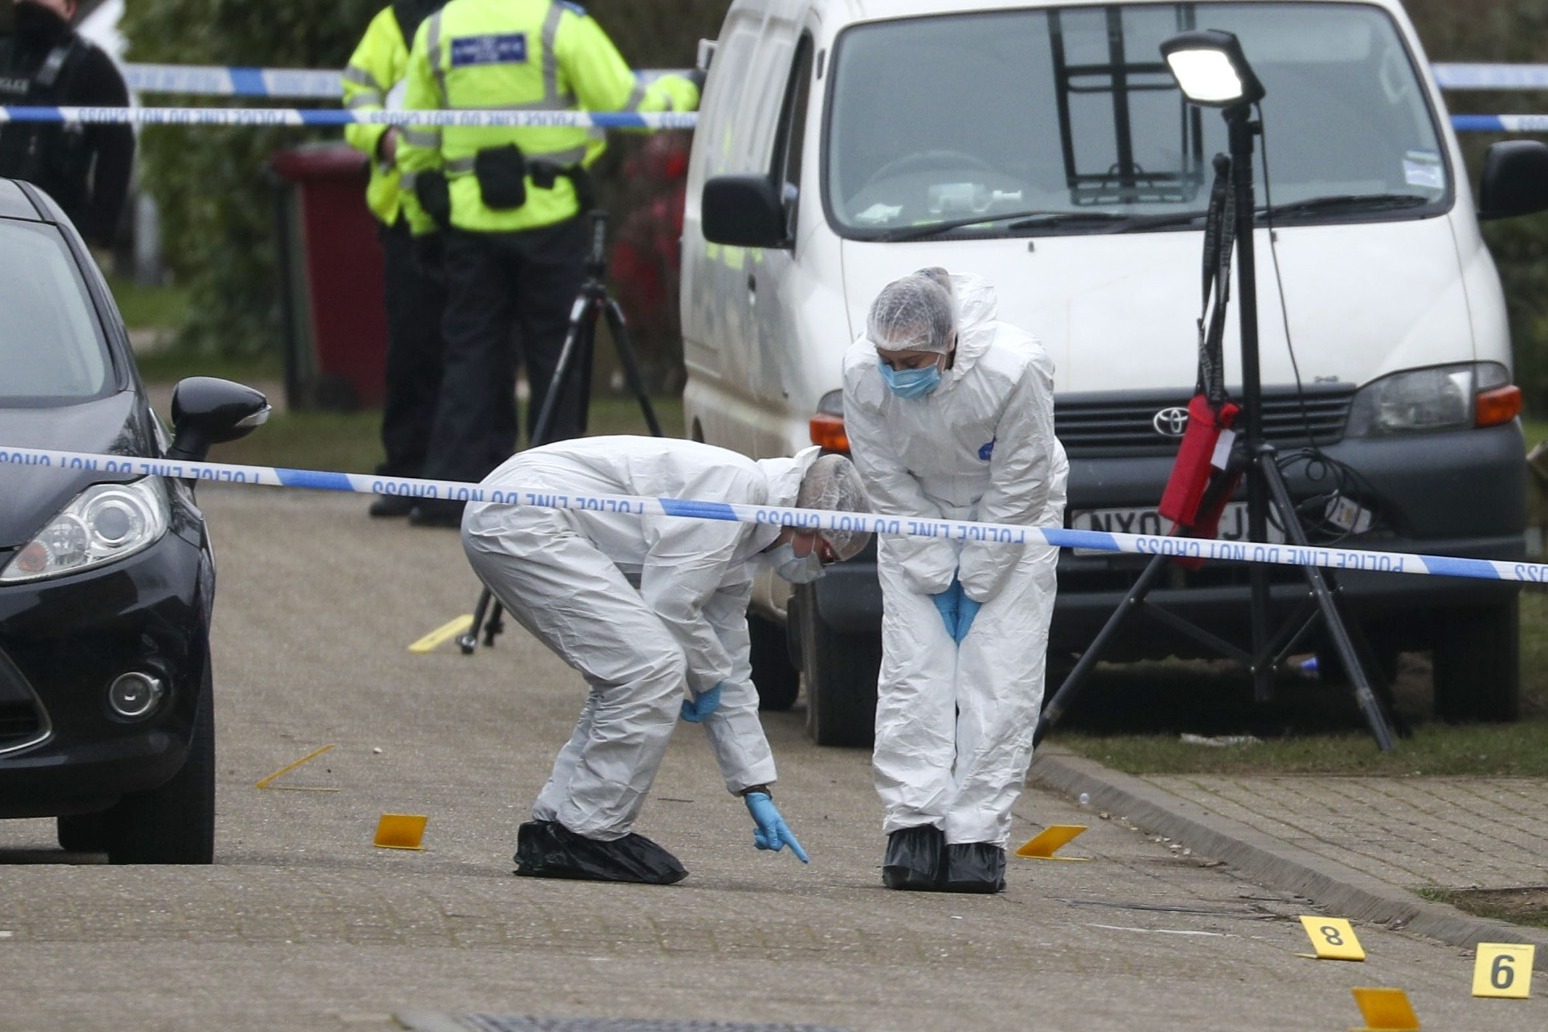 Murder investigation launched after stabbing death 